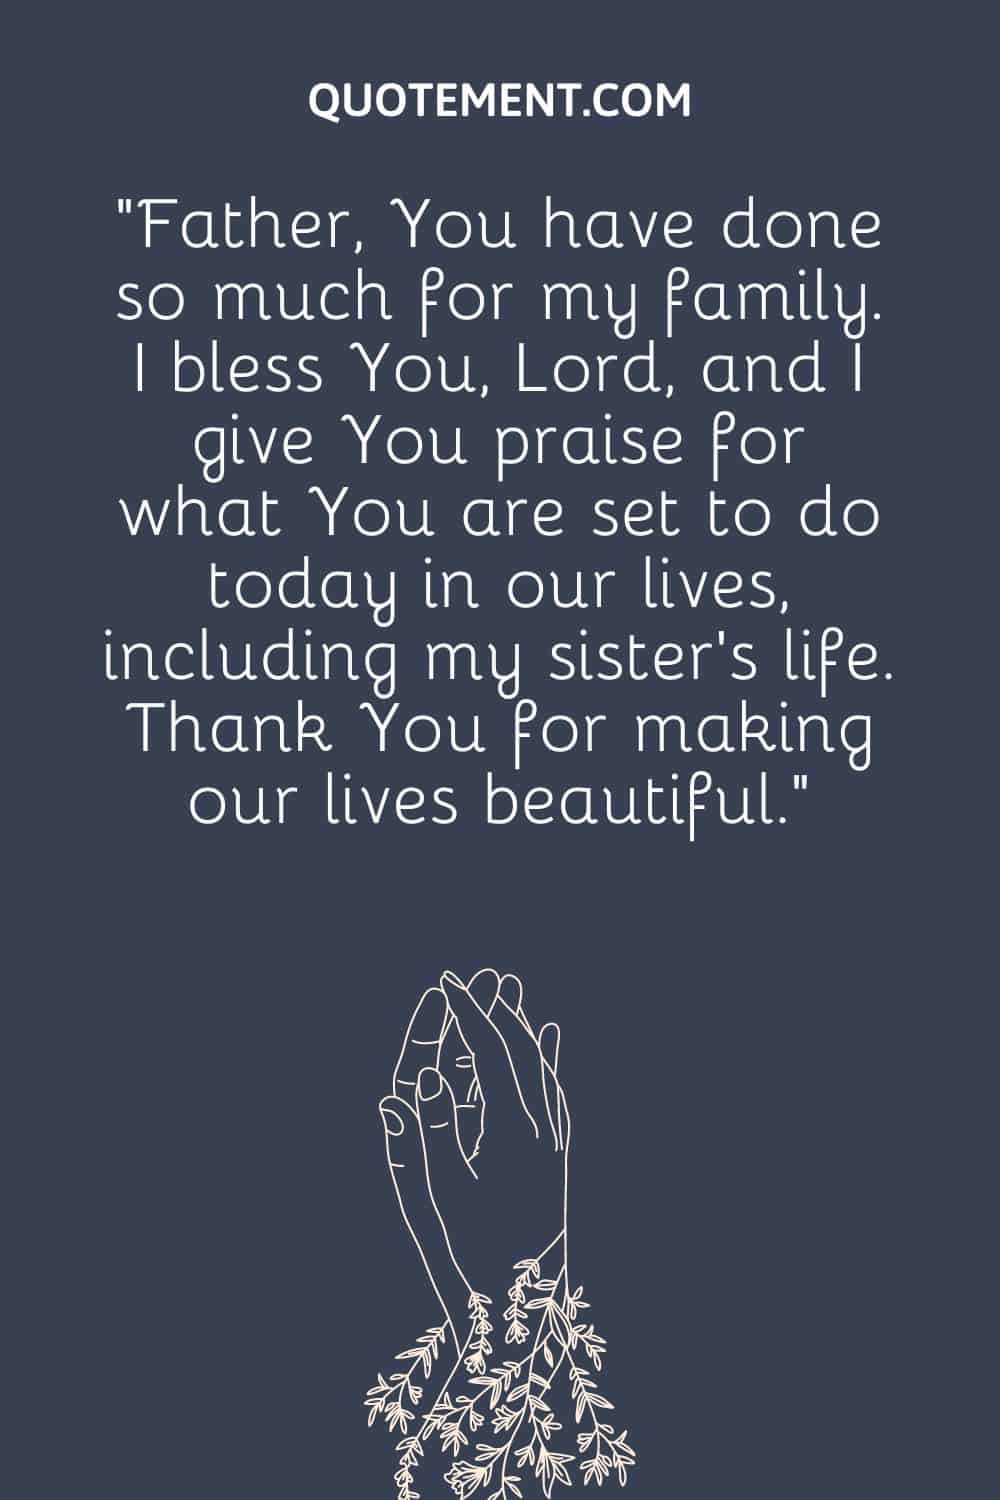 “Father, You have done so much for my family. I bless You, Lord, and I give You praise for what You are set to do today in our lives, including my sister’s life. Thank You for making our lives beautiful.”